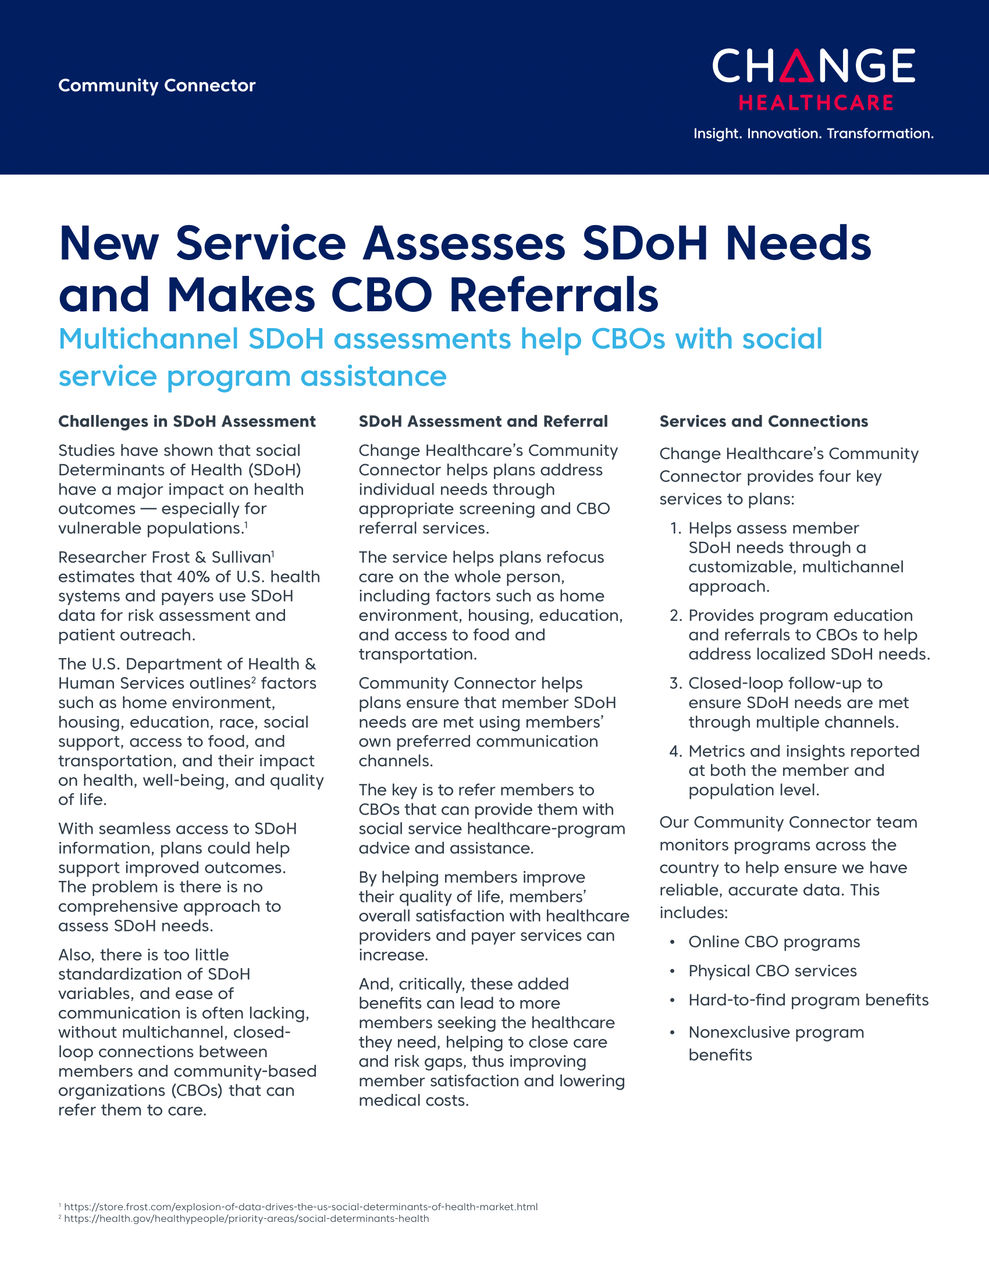 Change Healthcare Community Connector for Member Assessment and CBO Referral